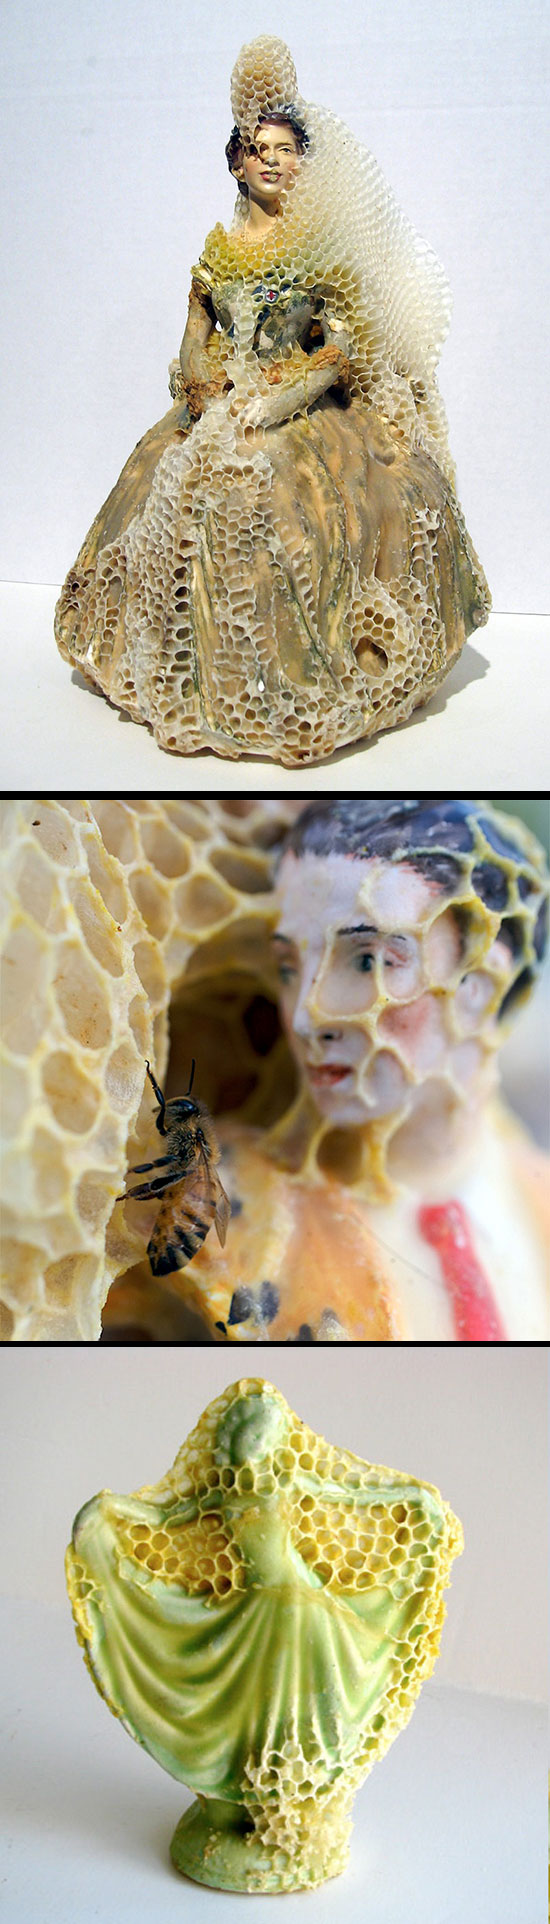 Aganetha Dyck, sculptures made by honeybees